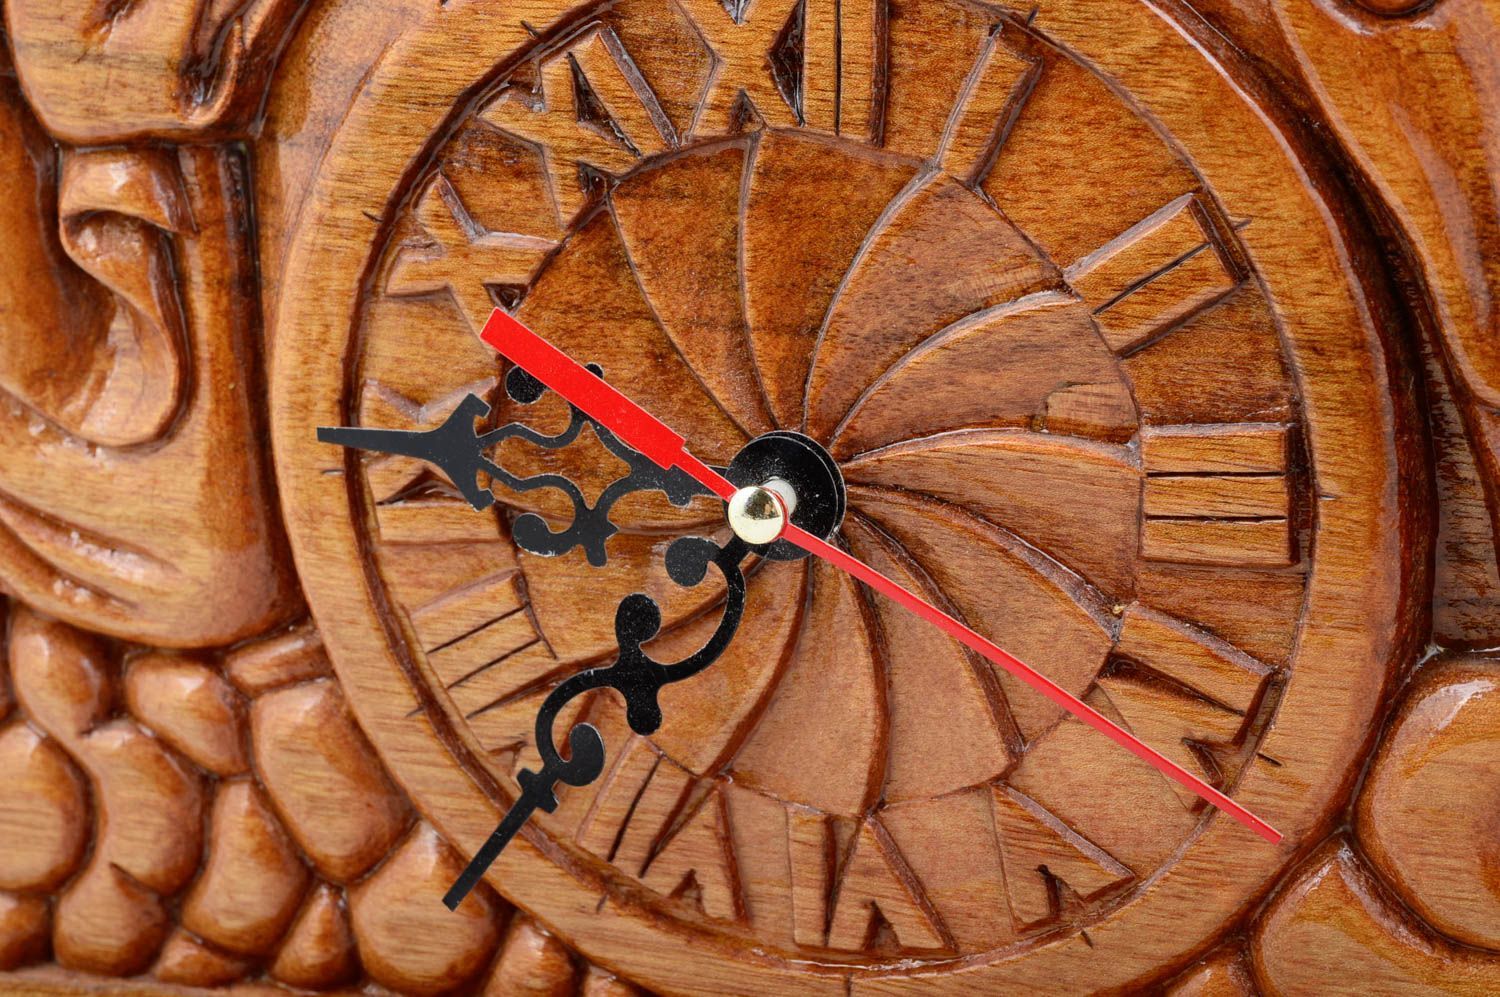 Unusual handmade wooden clock fireplace decorating ideas cool rooms wood craft photo 4